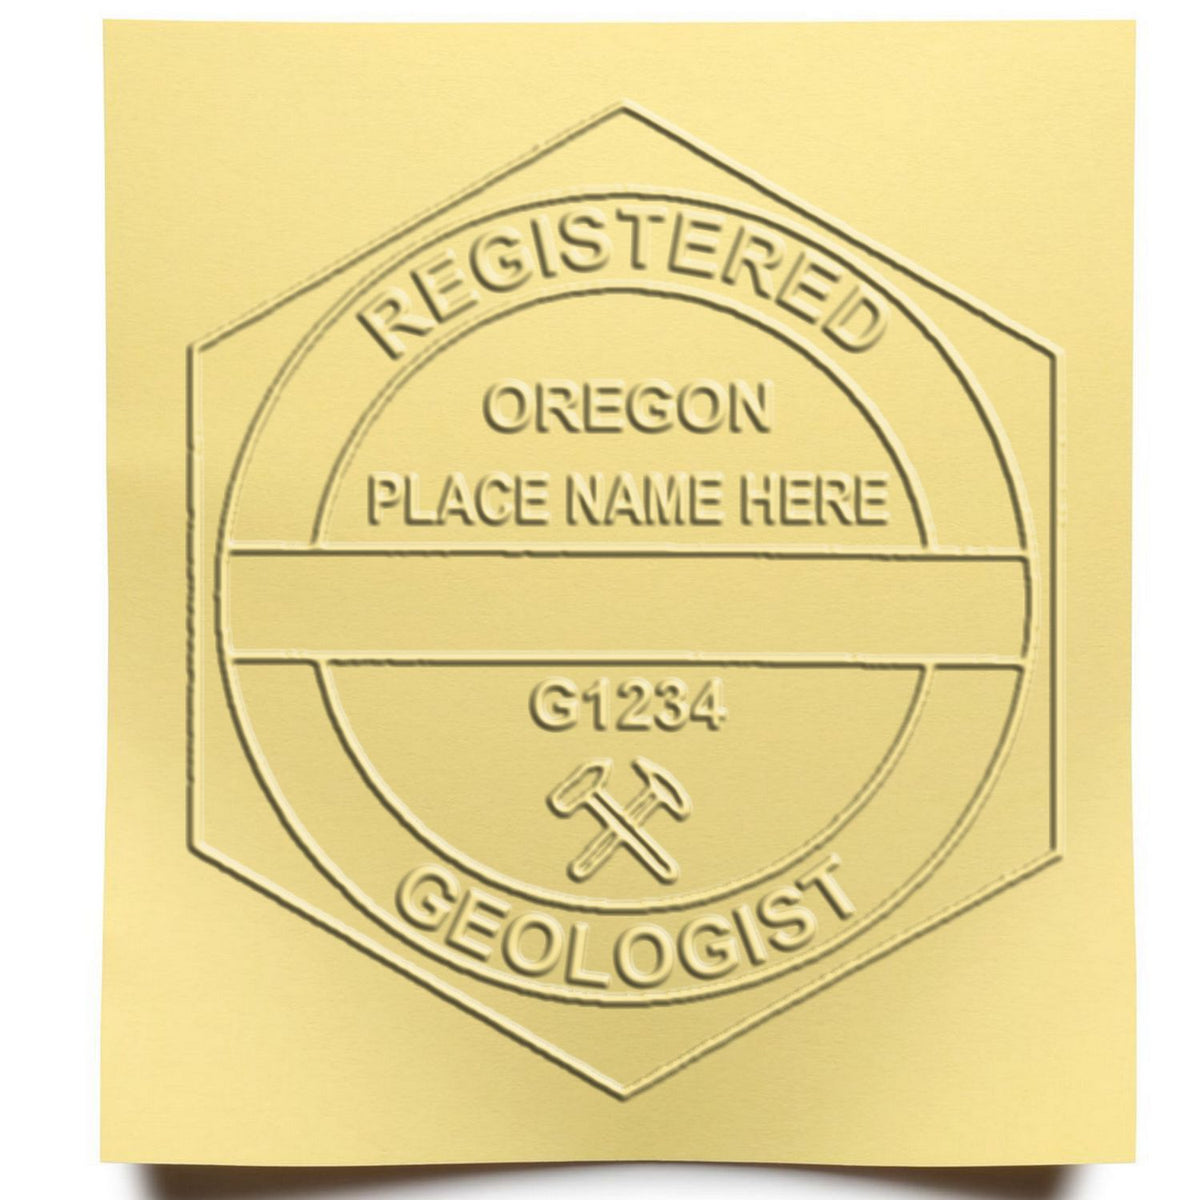 A stamped imprint of the Hybrid Oregon Geologist Seal in this stylish lifestyle photo, setting the tone for a unique and personalized product.